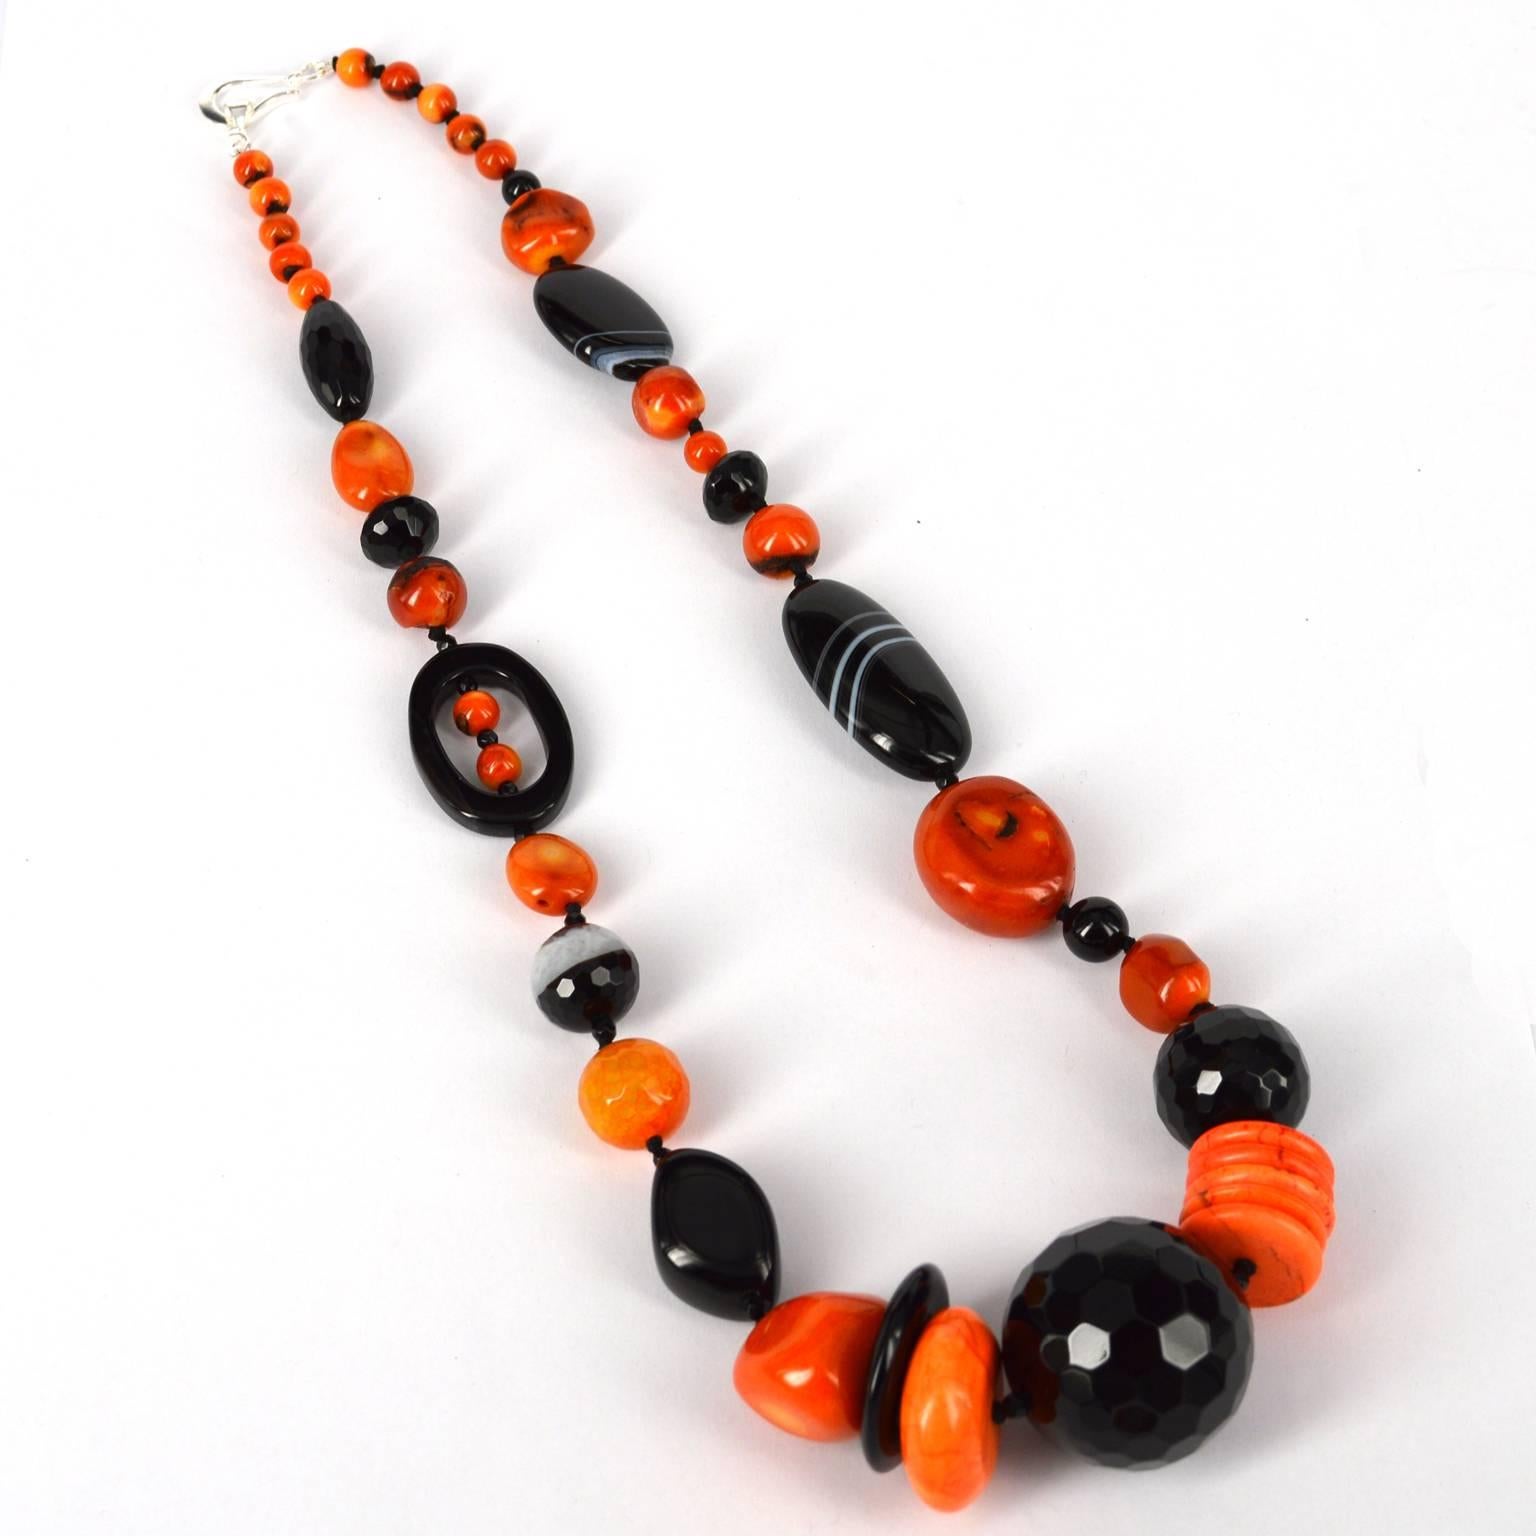 A mix of different shapes makes up this necklace with dyed bamboo coral nuggets, dyed howlite disks, faceted onyx rounds and black agate shapes.
The large faceted onyx round measures at 29mm. Hand knotted on black thread.
Total length of necklace is